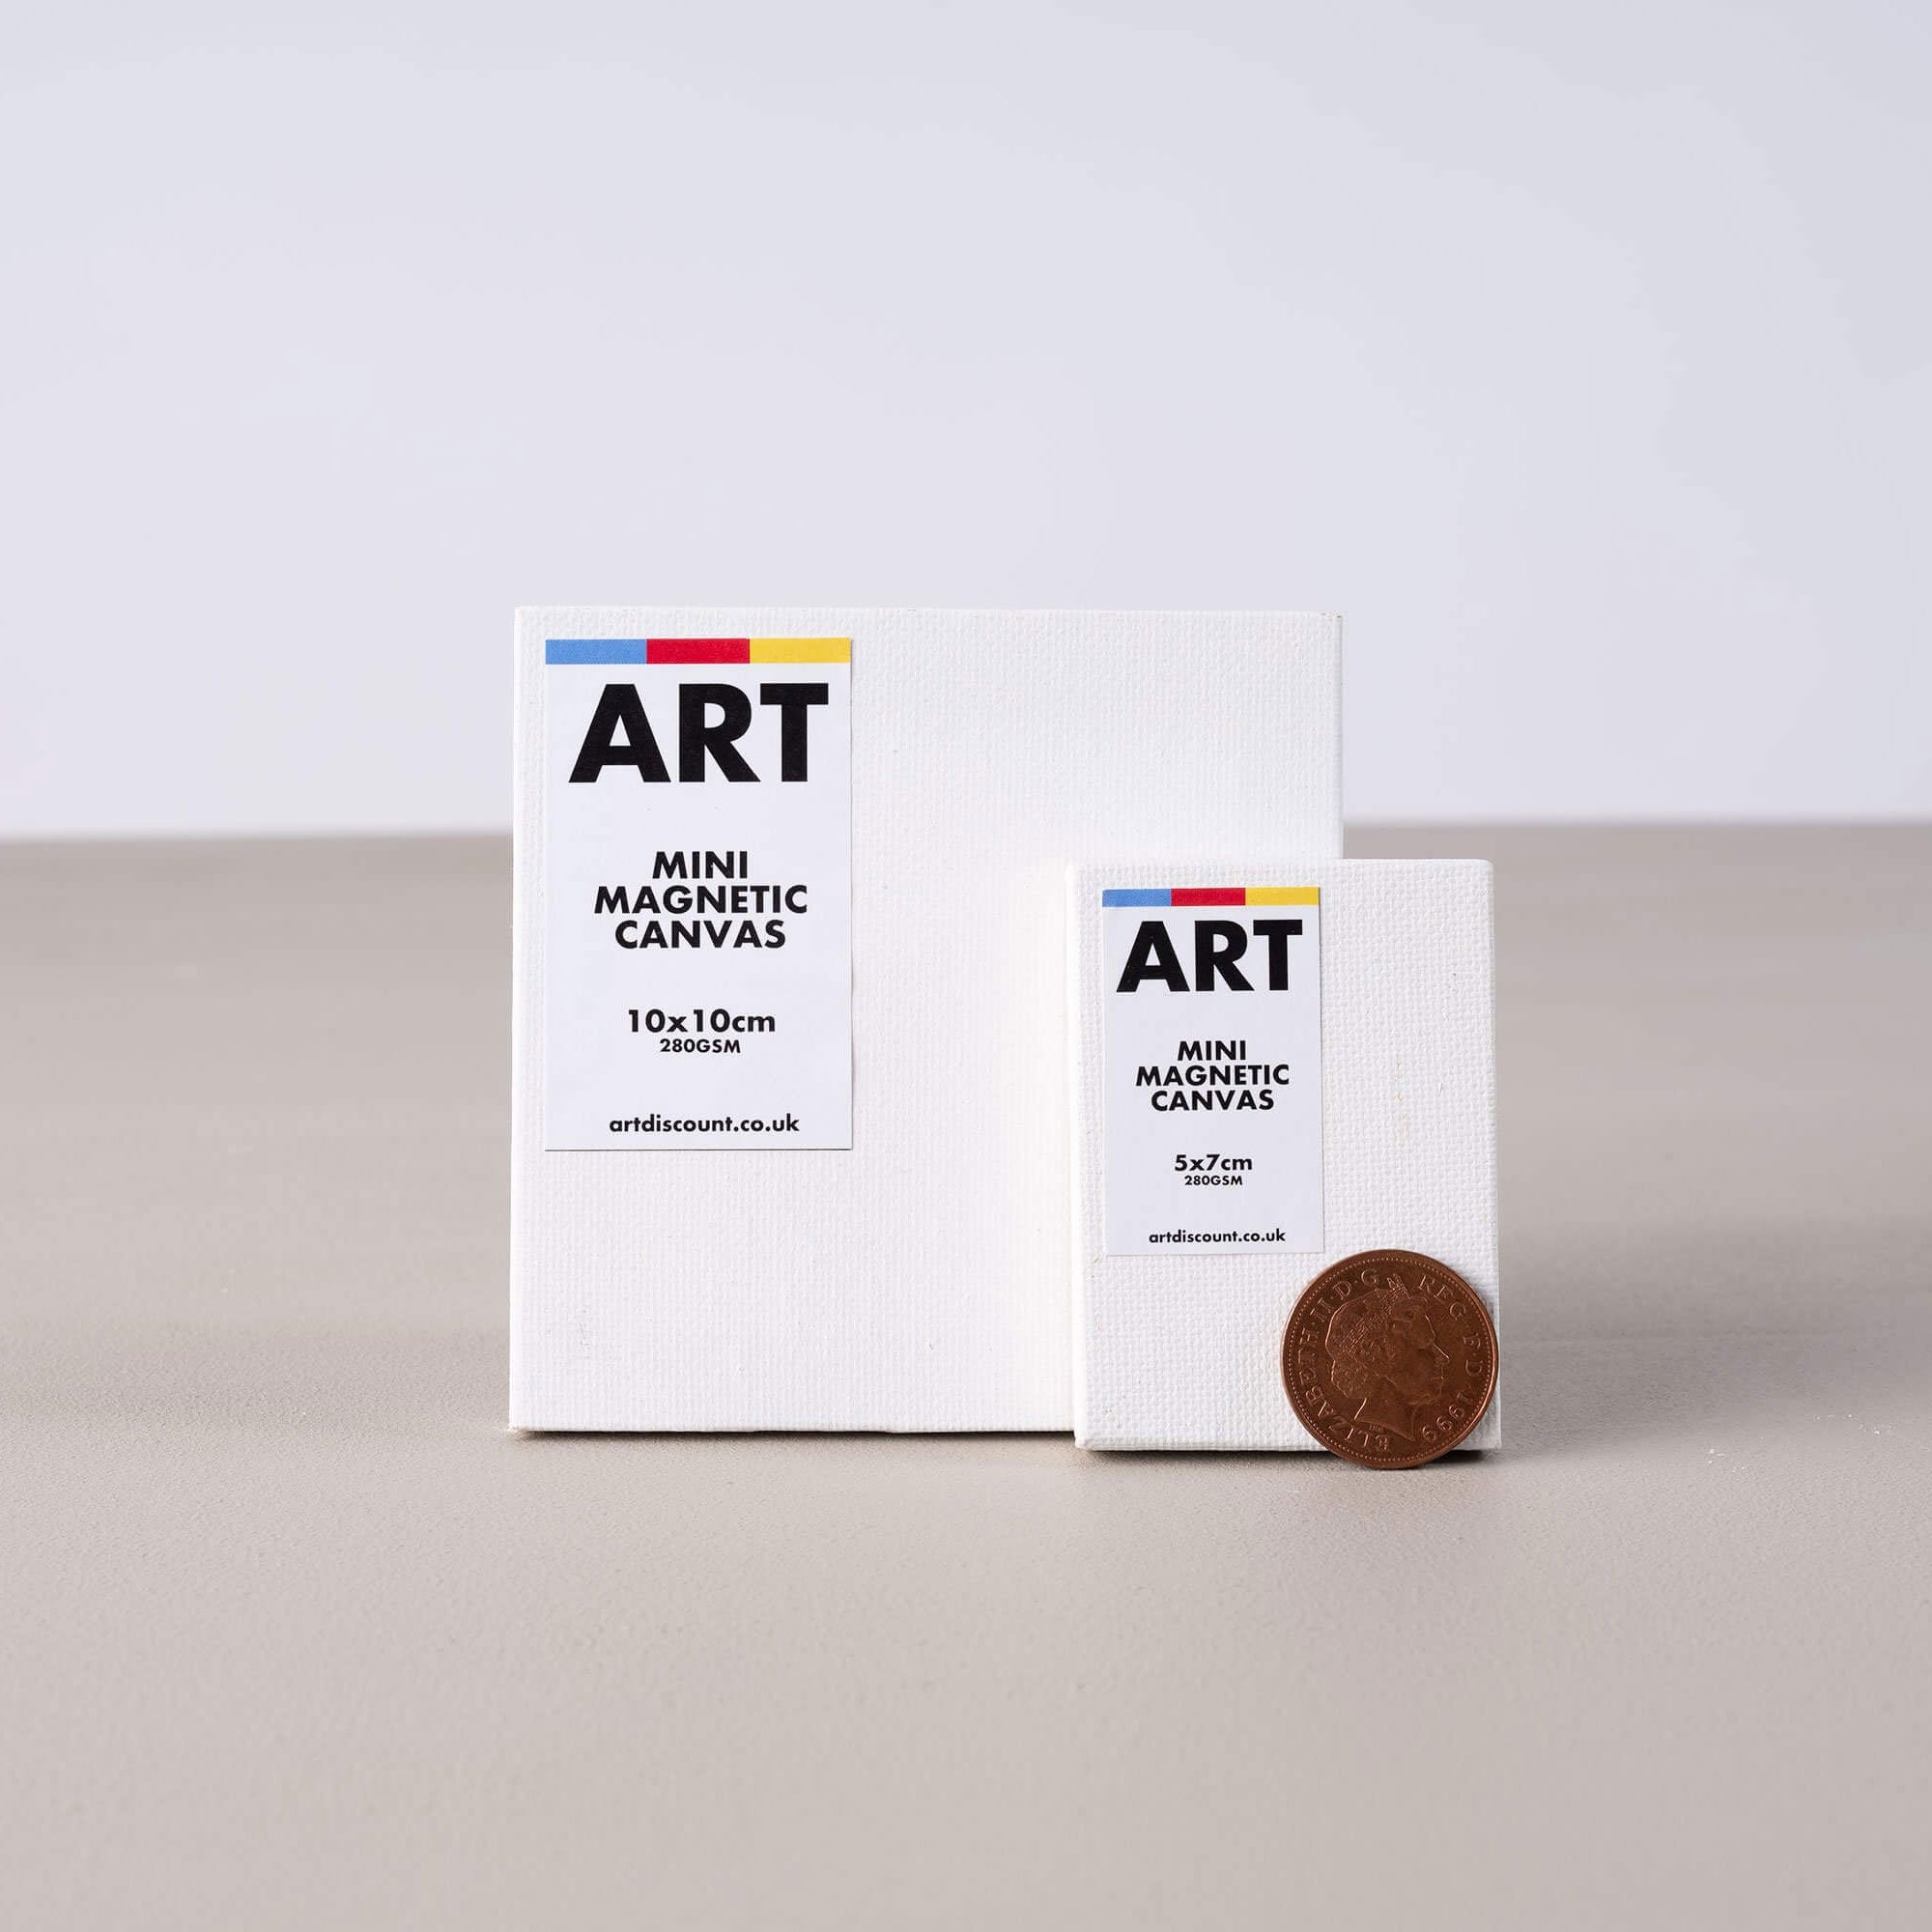 ARTdiscount Mini Magnetic Canvases, with a penny for scale